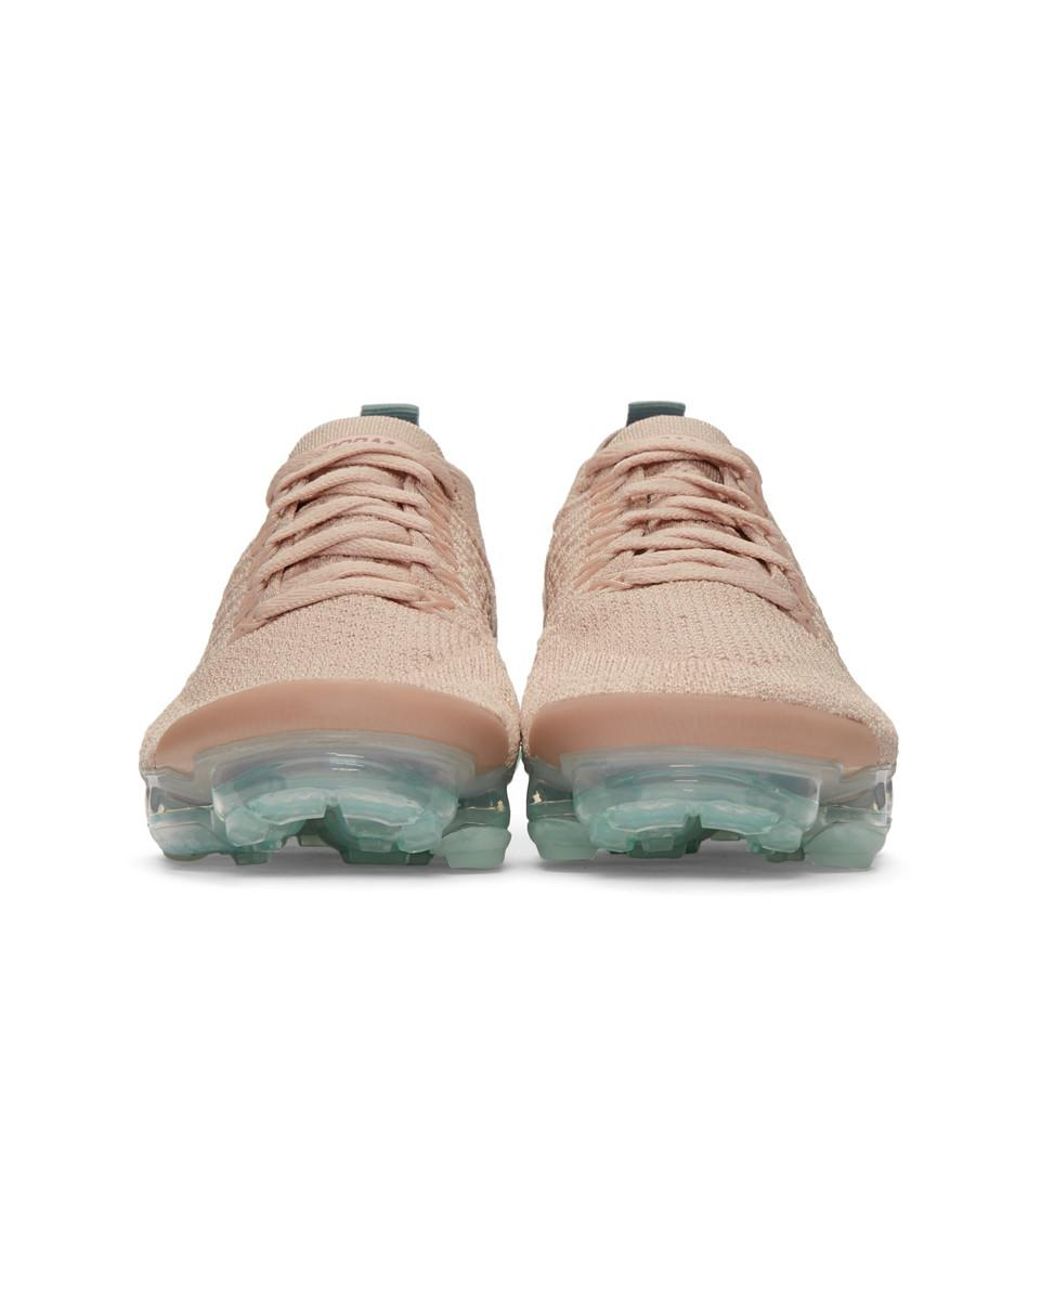 nike vapormax pink and blue